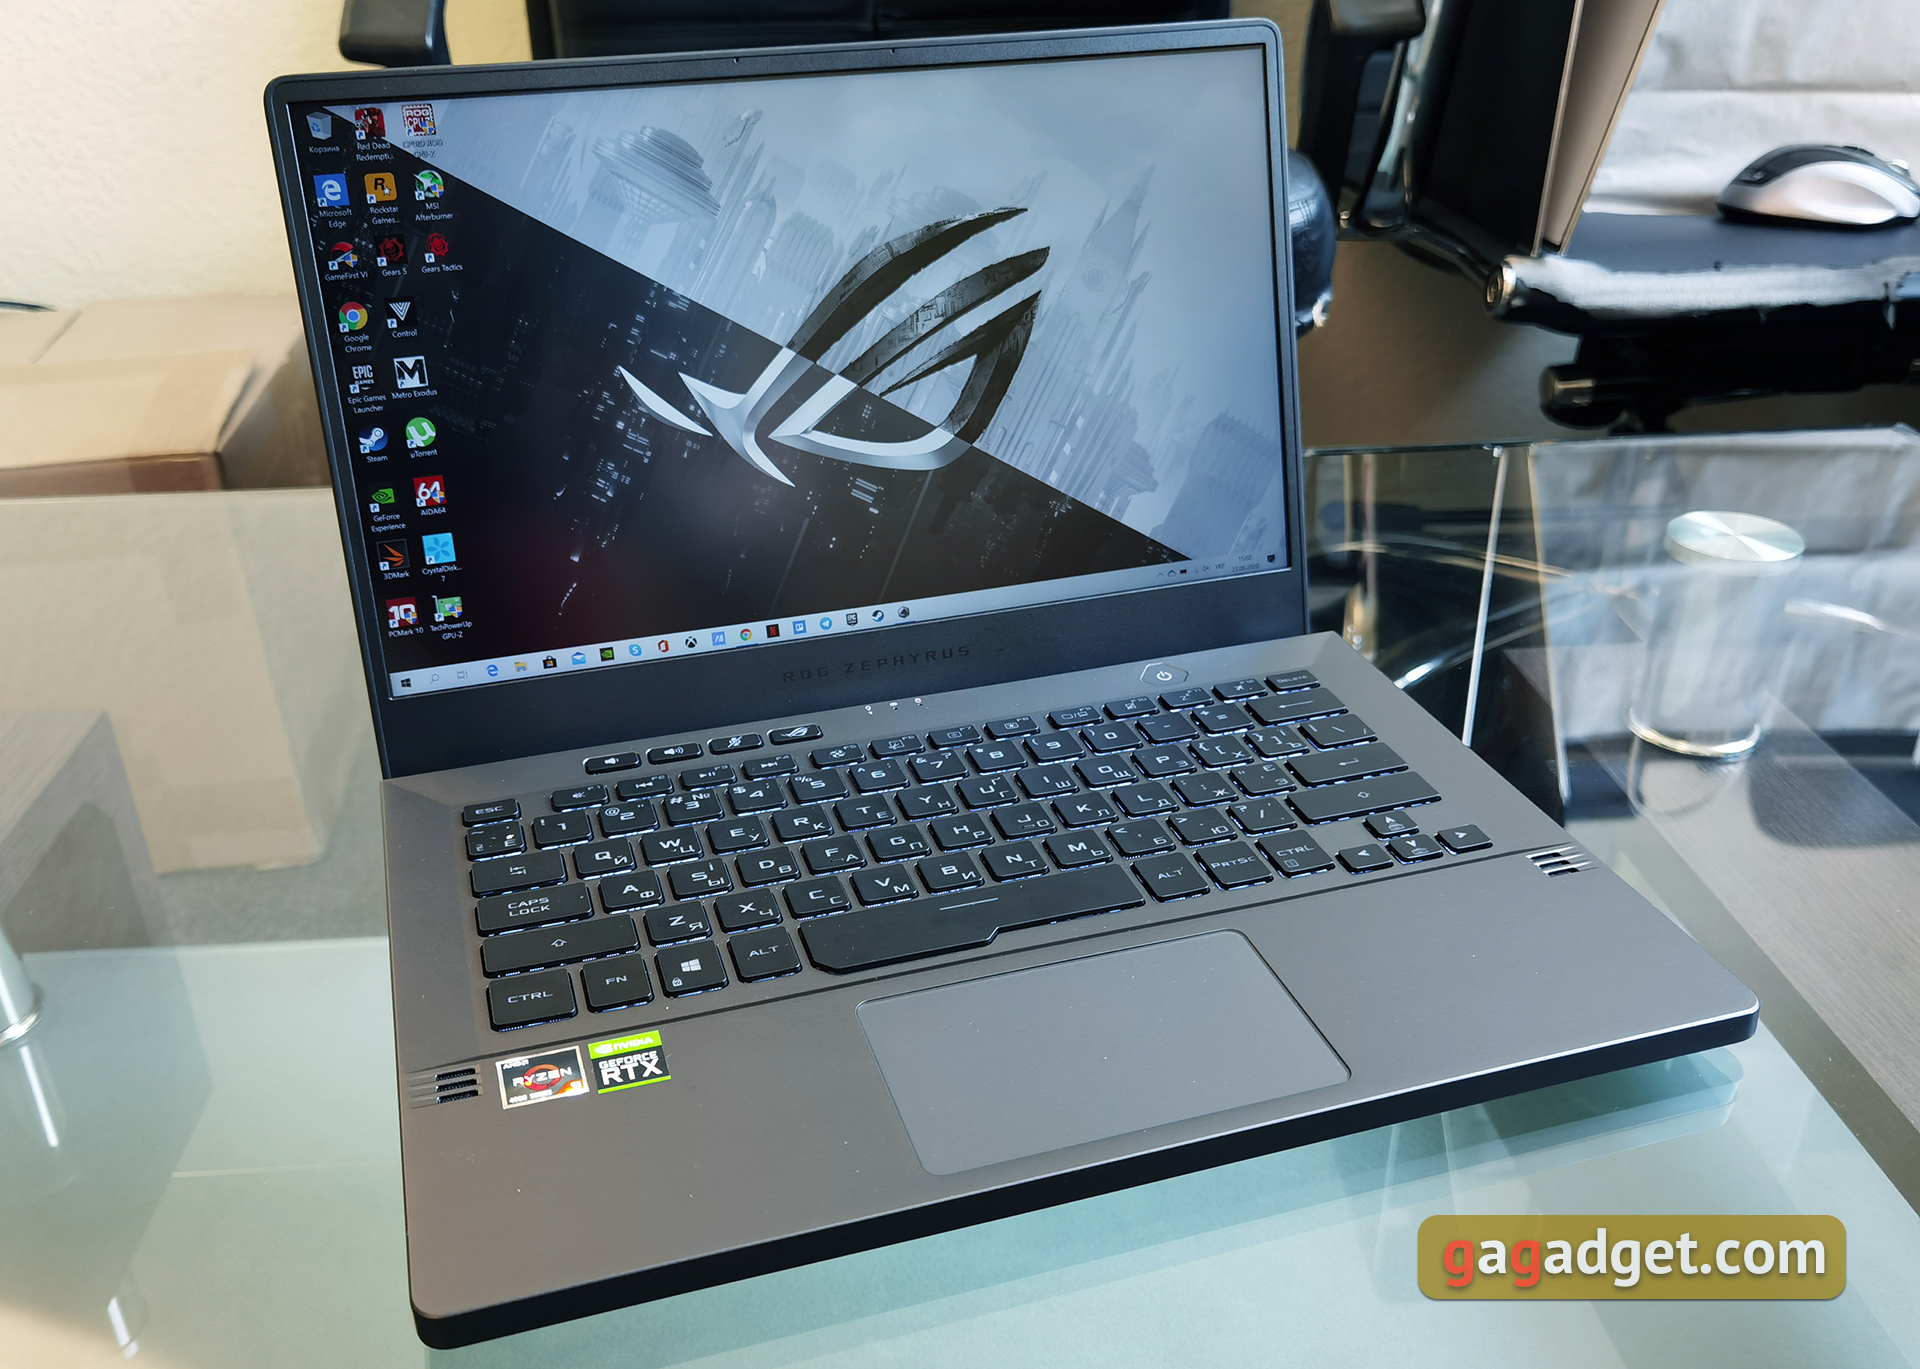 Review Of The Asus Rog Zephyrus G14 Gaming Laptop Proper Ultraportable Gaming Geek Tech Online